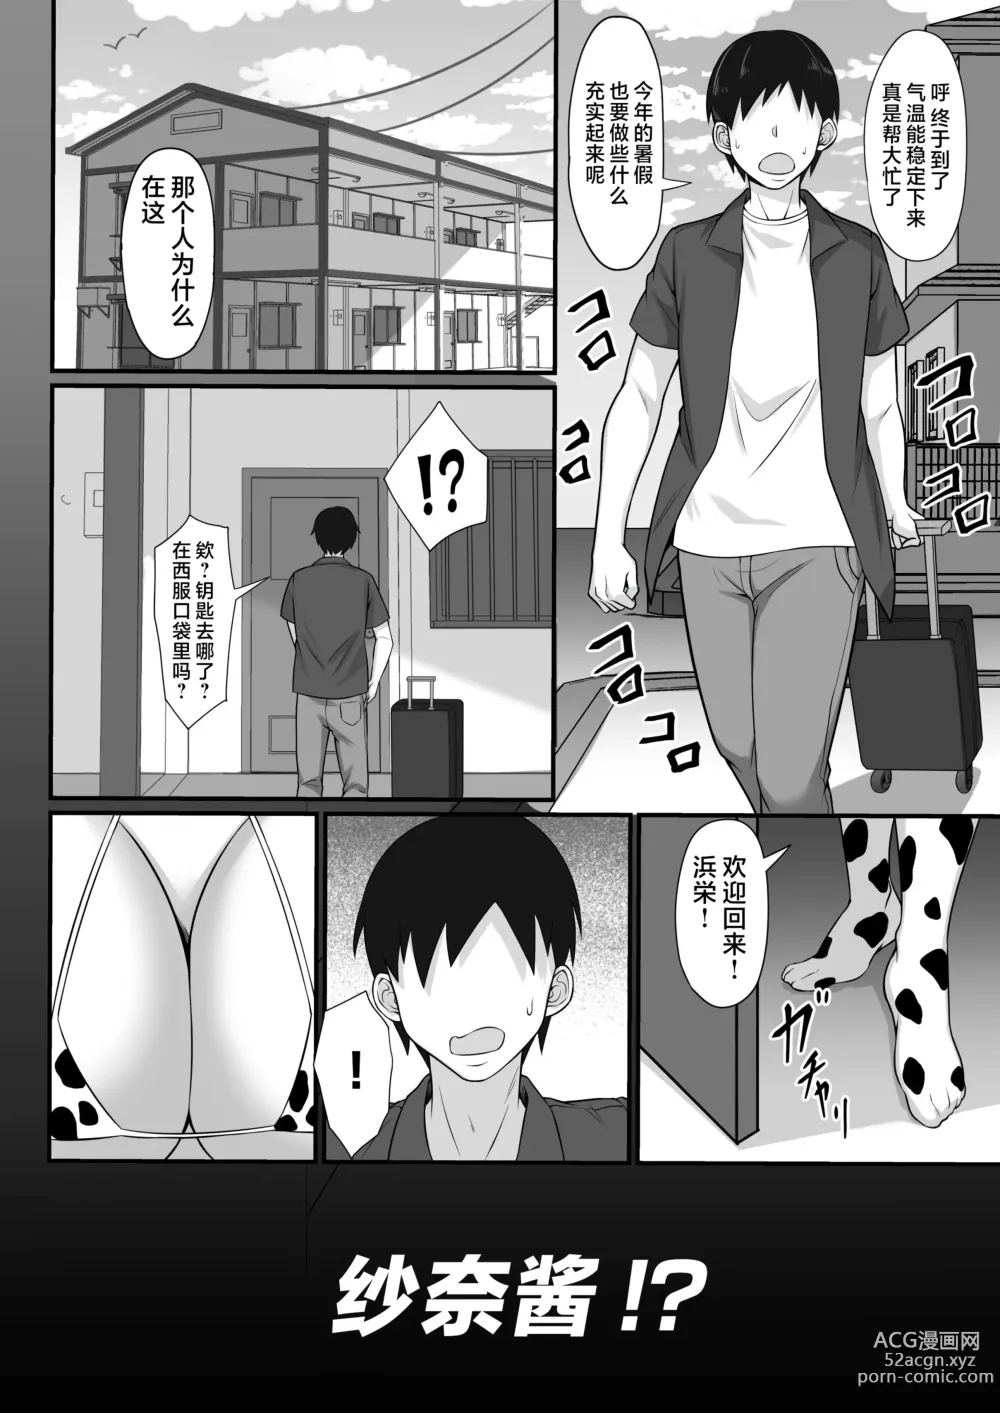 Page 3 of doujinshi 我的上京性生活12 